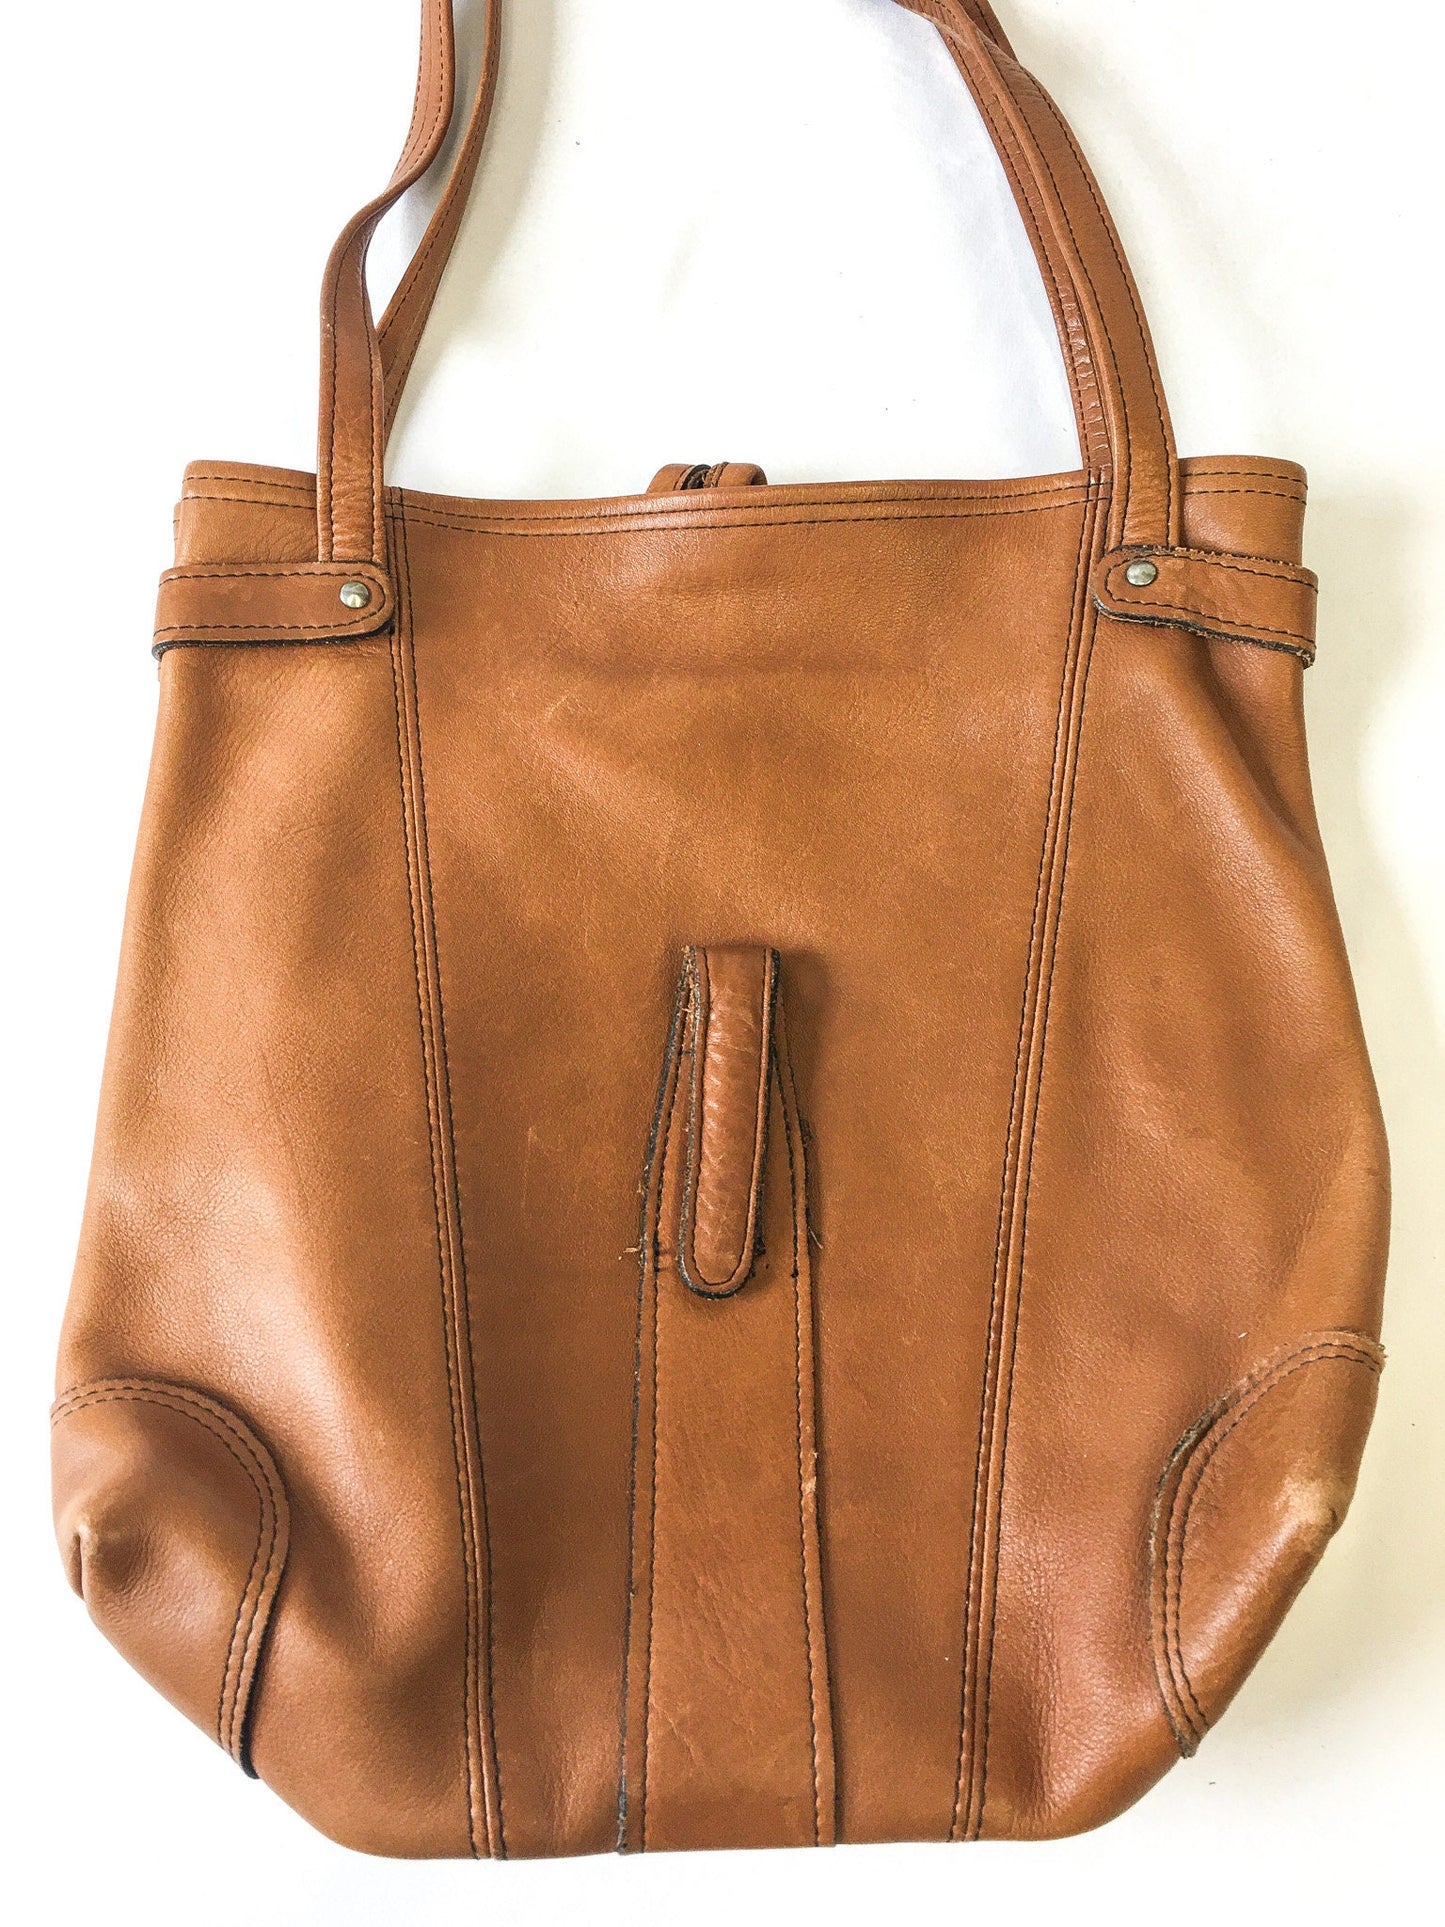 Vintage Boots and Saddle by Colonial Brown Leather Tote Bag, Vintage Leather Handbag